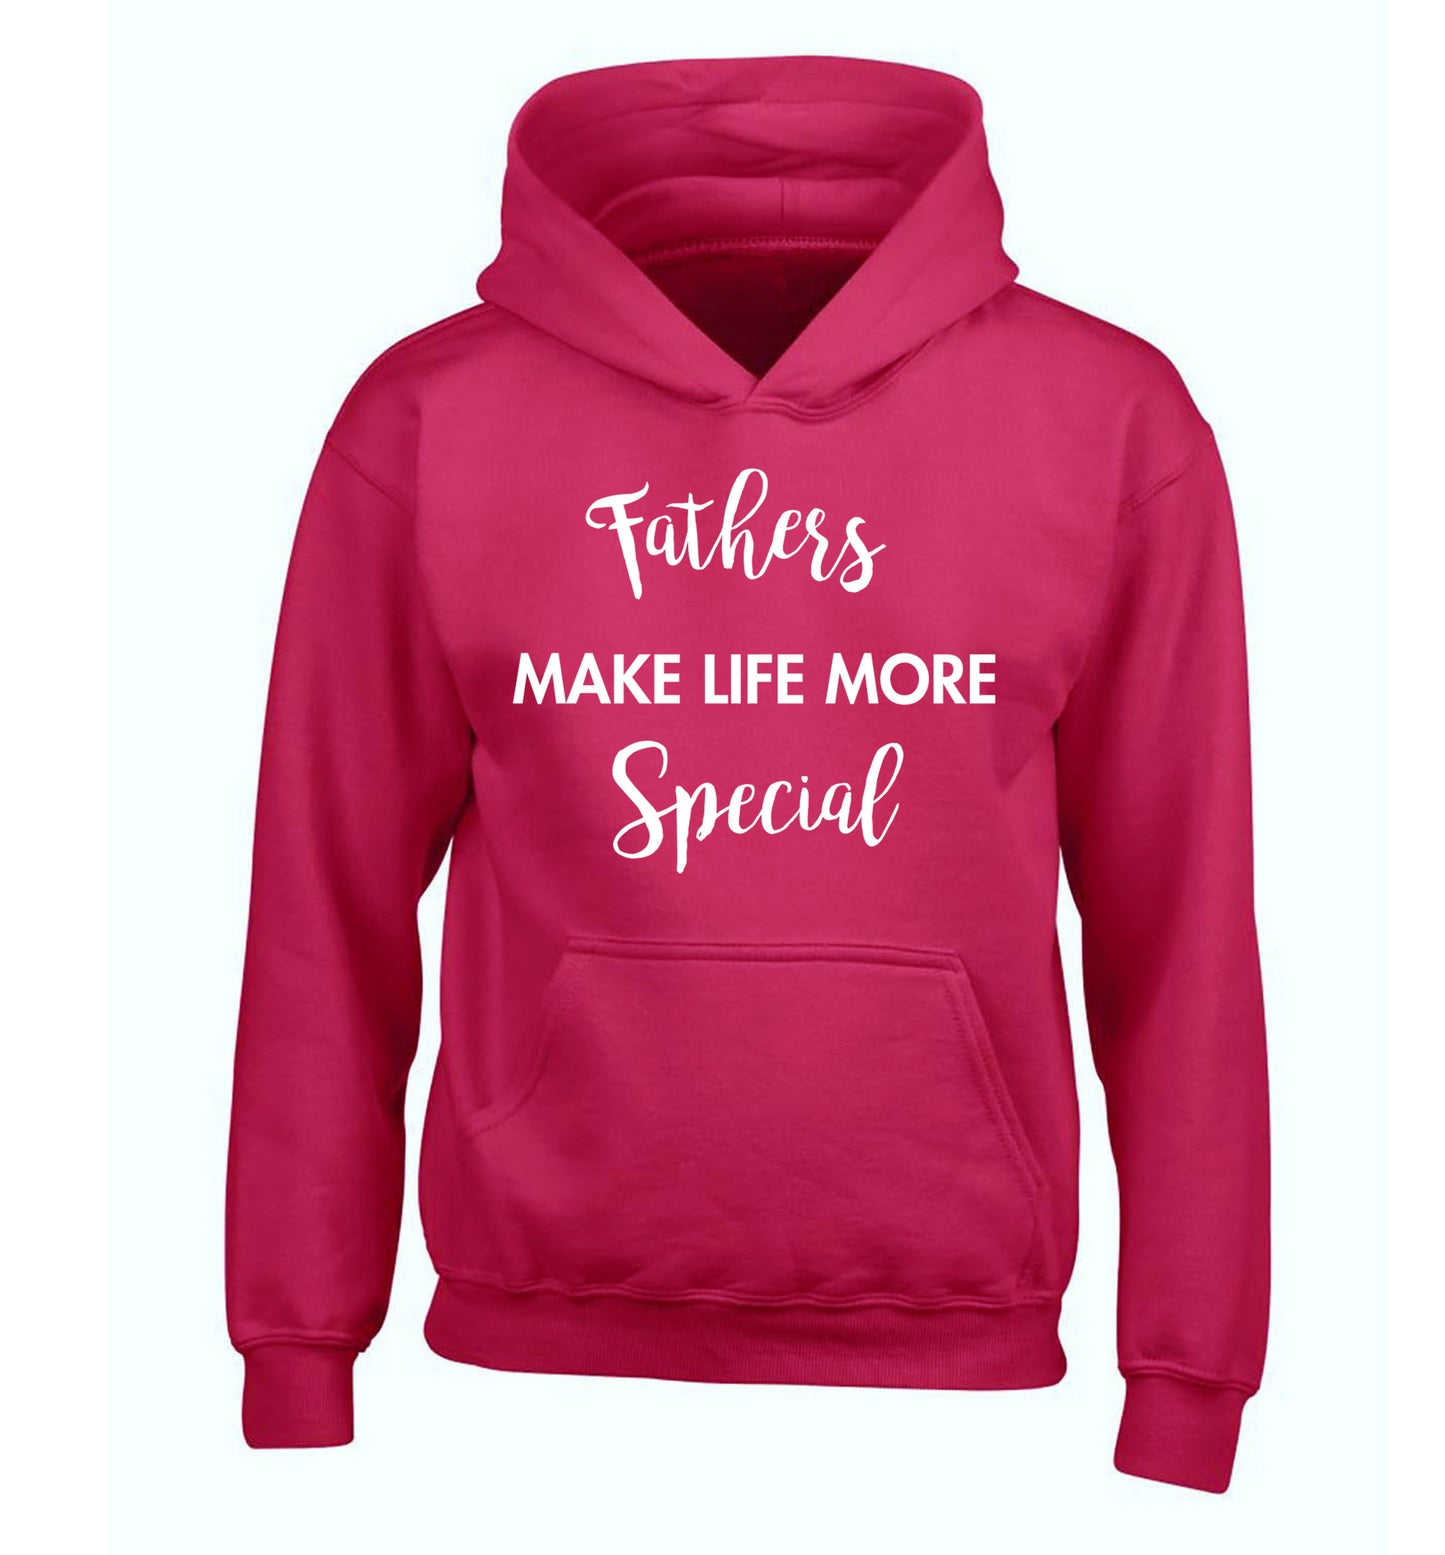 Fathers make life more special children's pink hoodie 12-14 Years